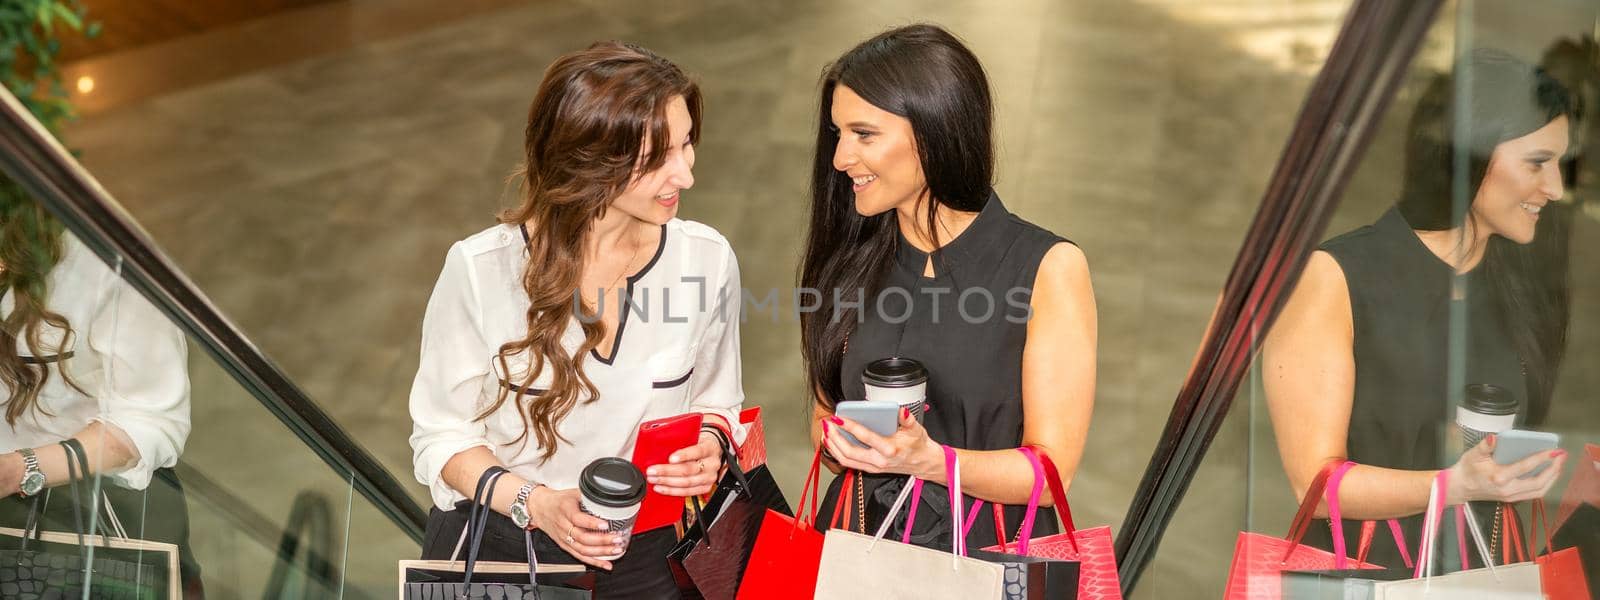 Two girlfriends going up the escalator with shopping bags and talking in the shopping mall